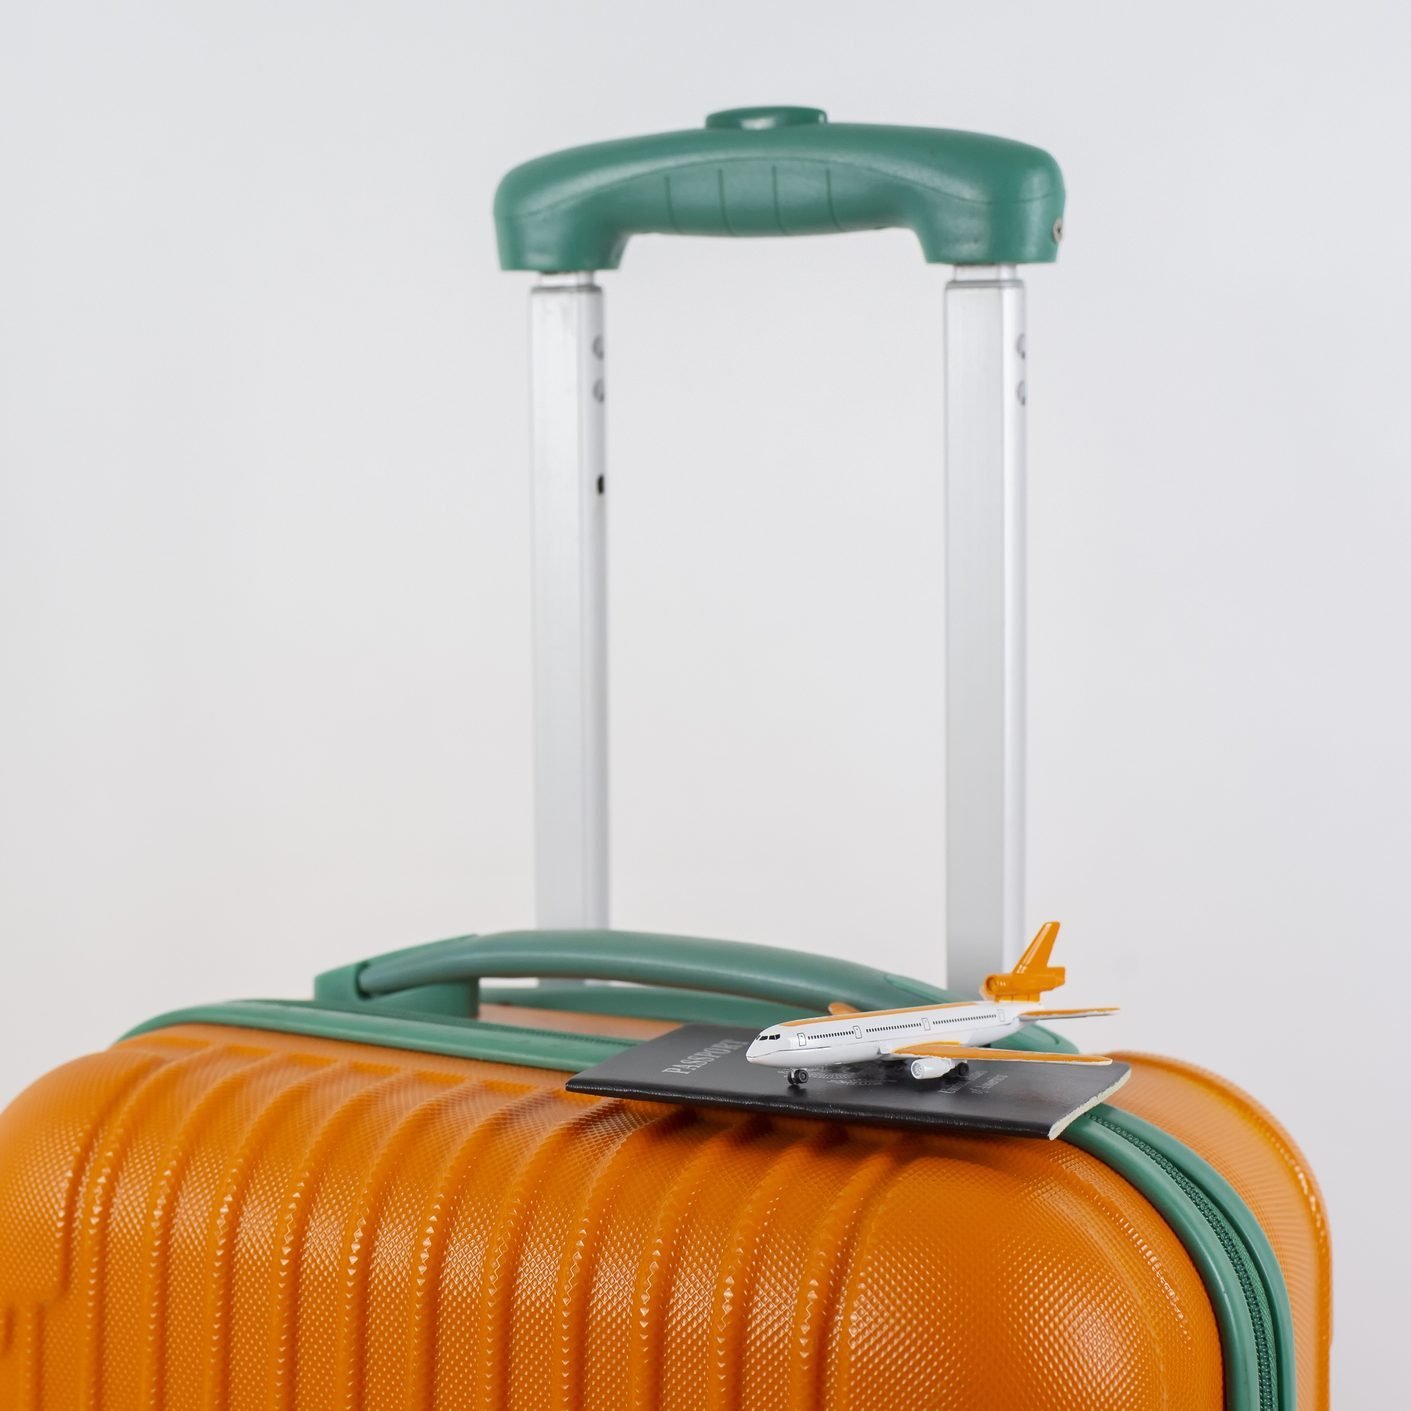 17 Prohibited Items in Checked Baggage